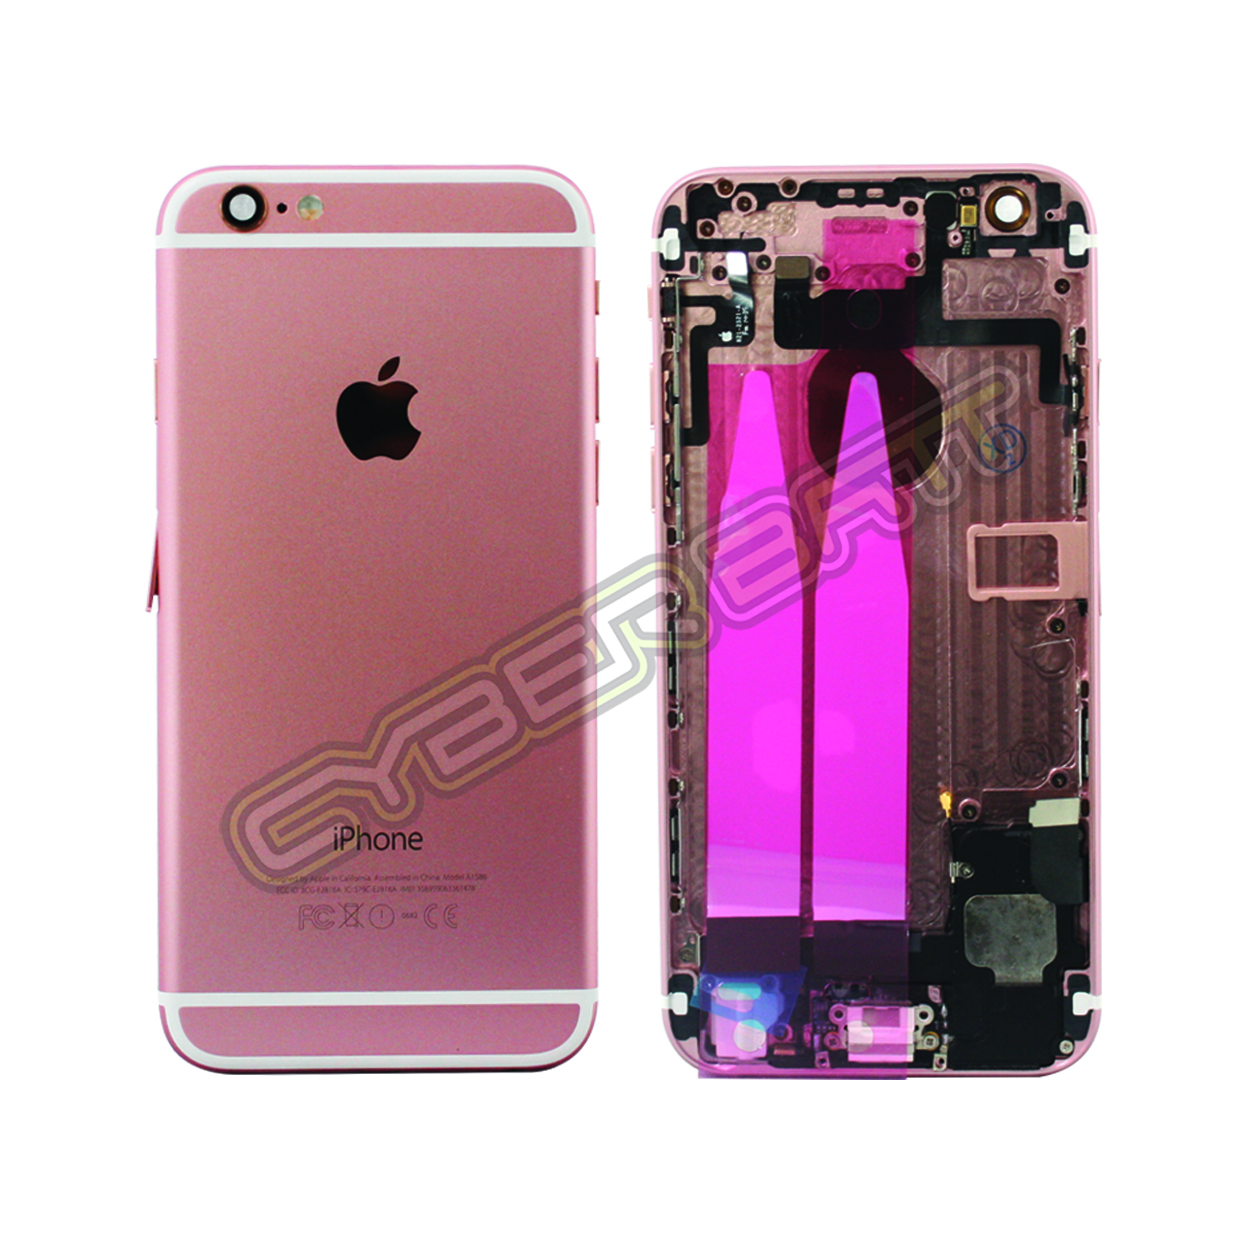  iPhone 6G Back cover with small parts Pink 